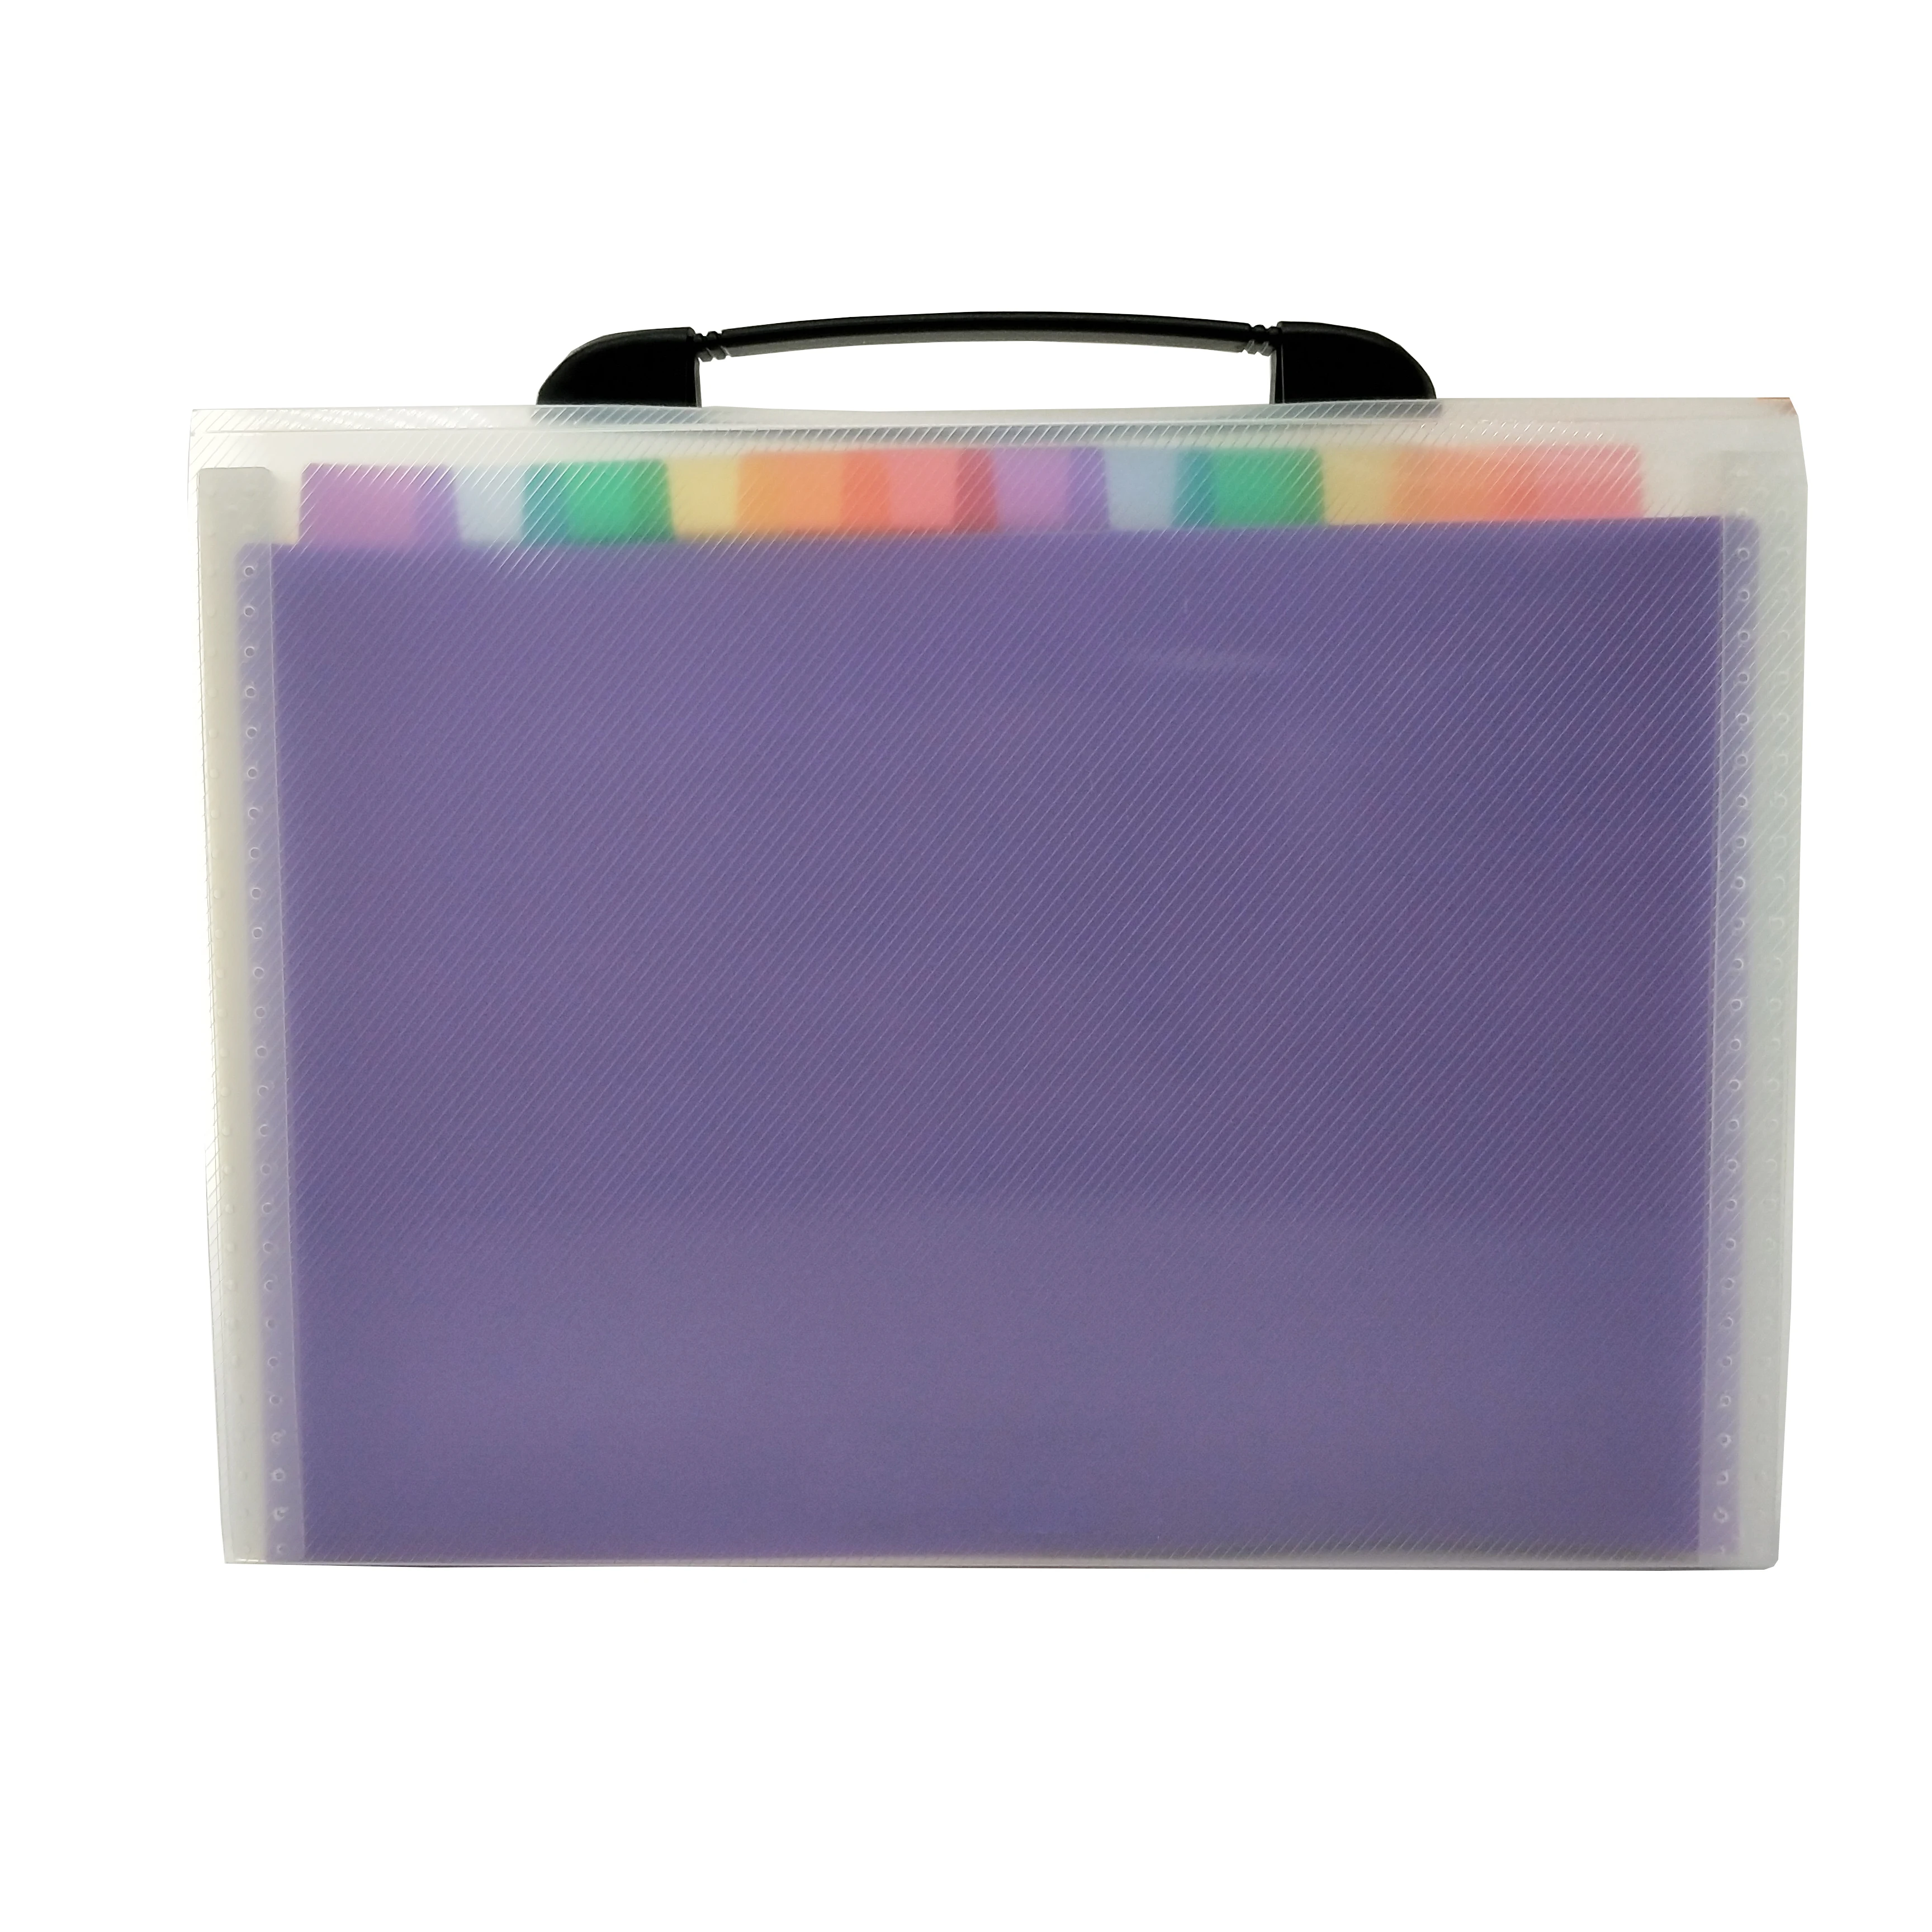 
13 Pockets-Handle Portable Expandable Multicolor A4 Accordion File Folder for Business Office 